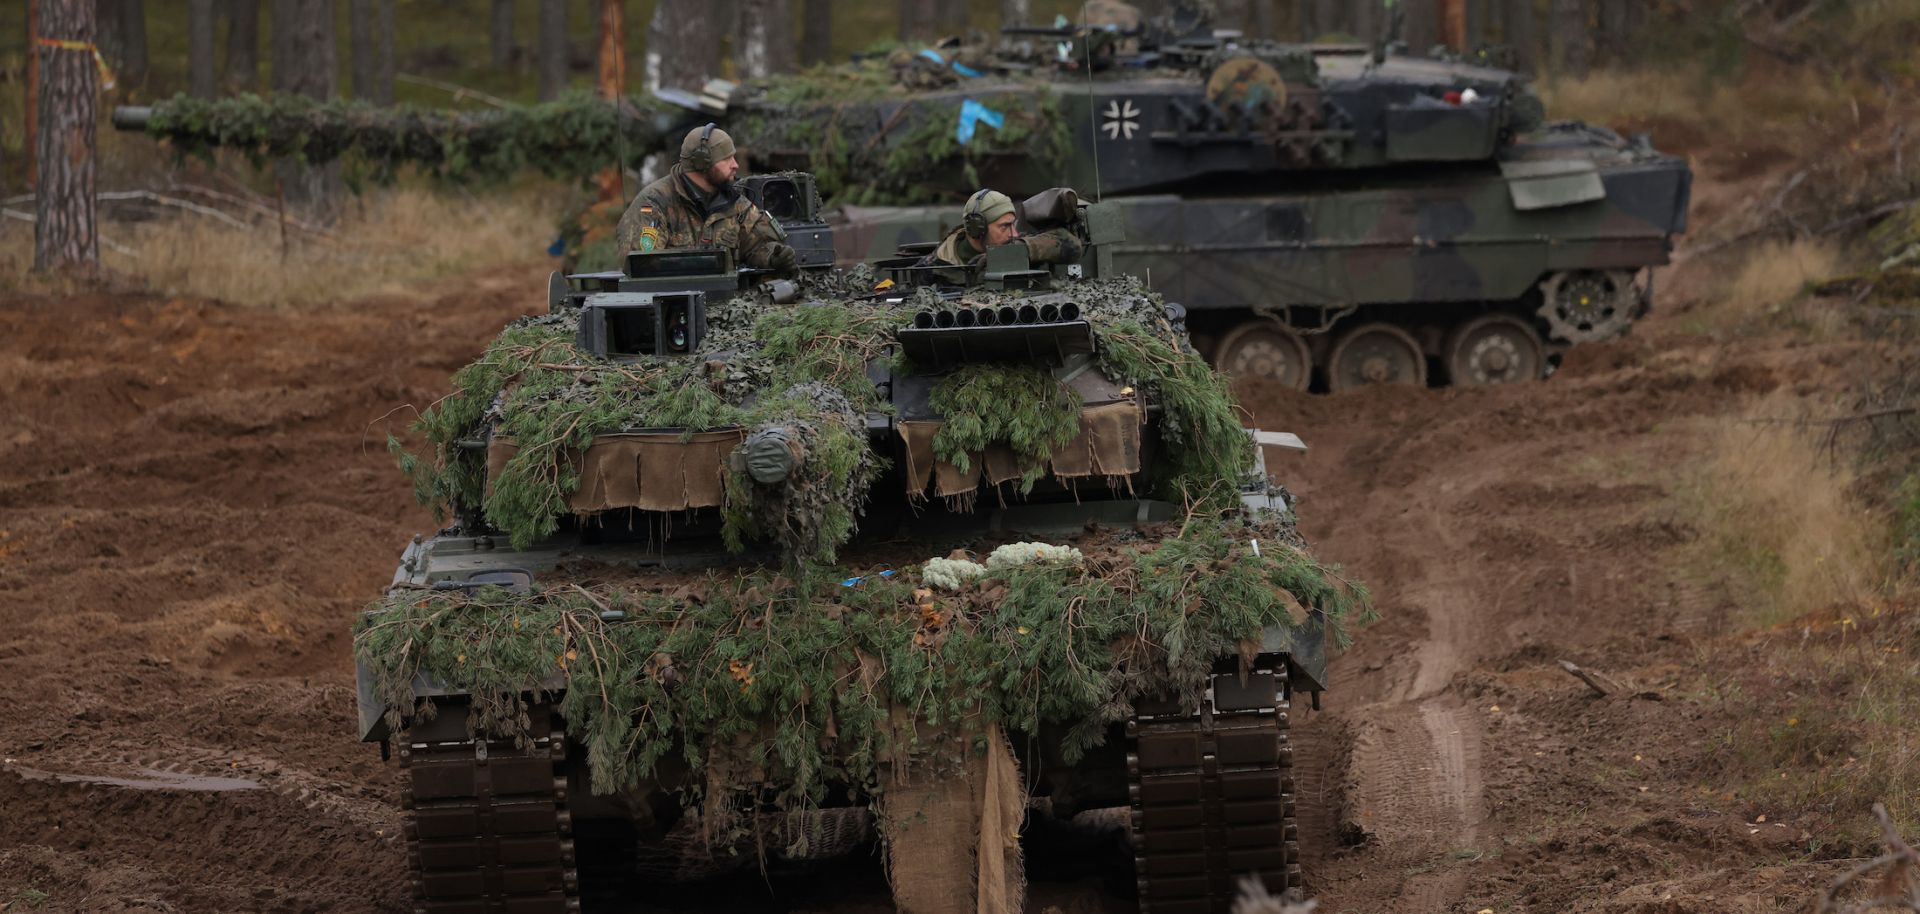 Two Leopard 2A6 main battle tanks of the German armed forces participate in the NATO Iron Wolf military exercises on Oct. 27, 2022, in Pabrade, Lithuania. 